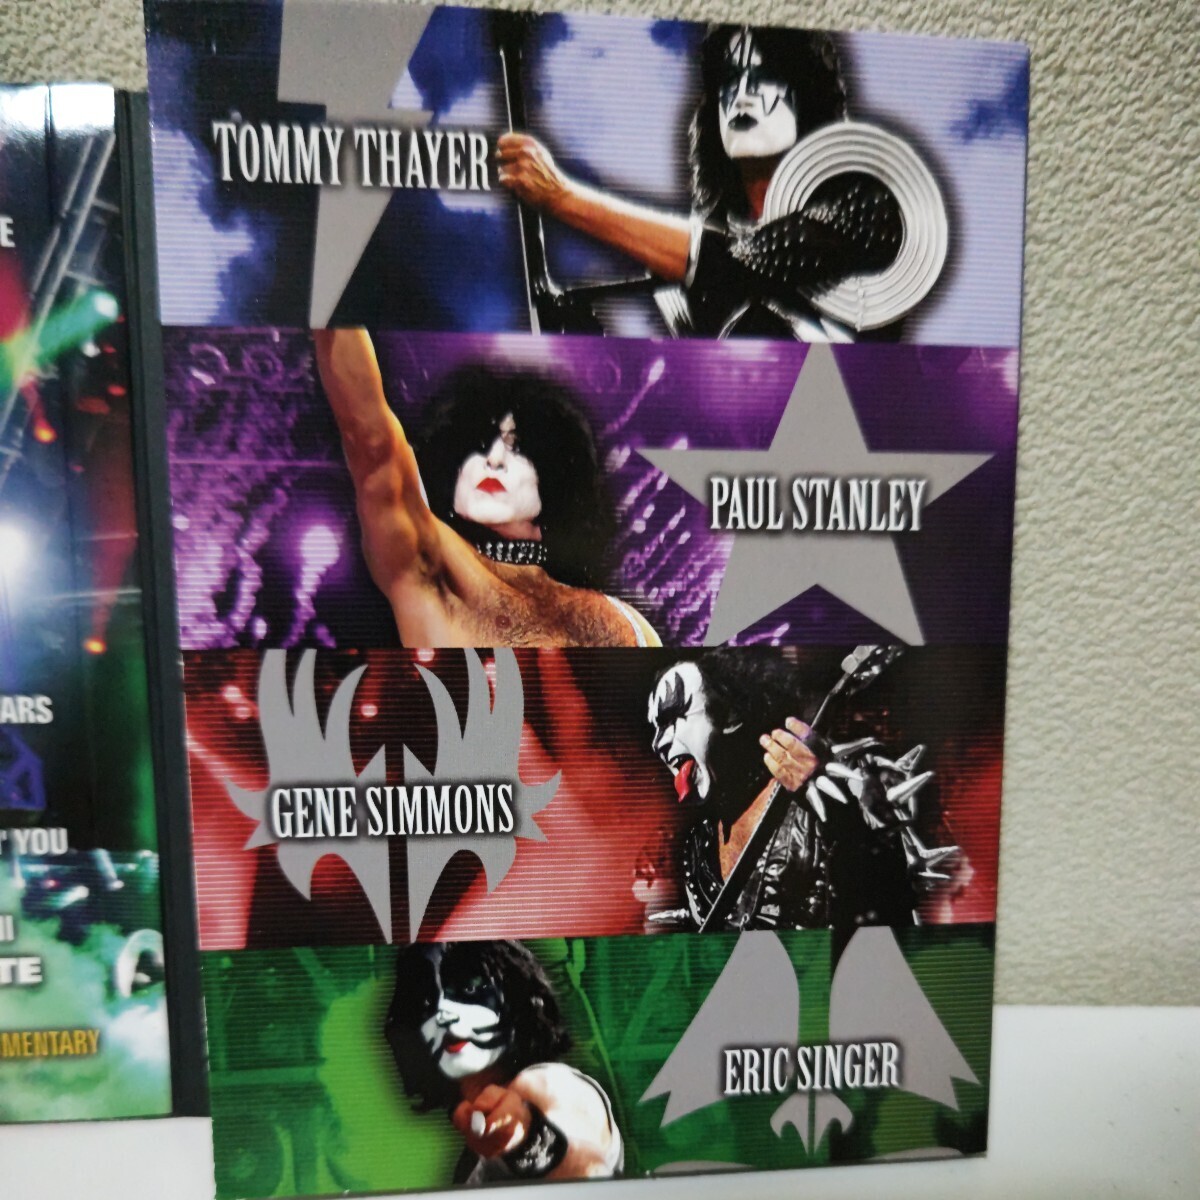 KISS/Rock The Nation Live! 輸入盤DVD 2枚組 キッス ポール・スタンレー ジーン・シモンズ_画像7